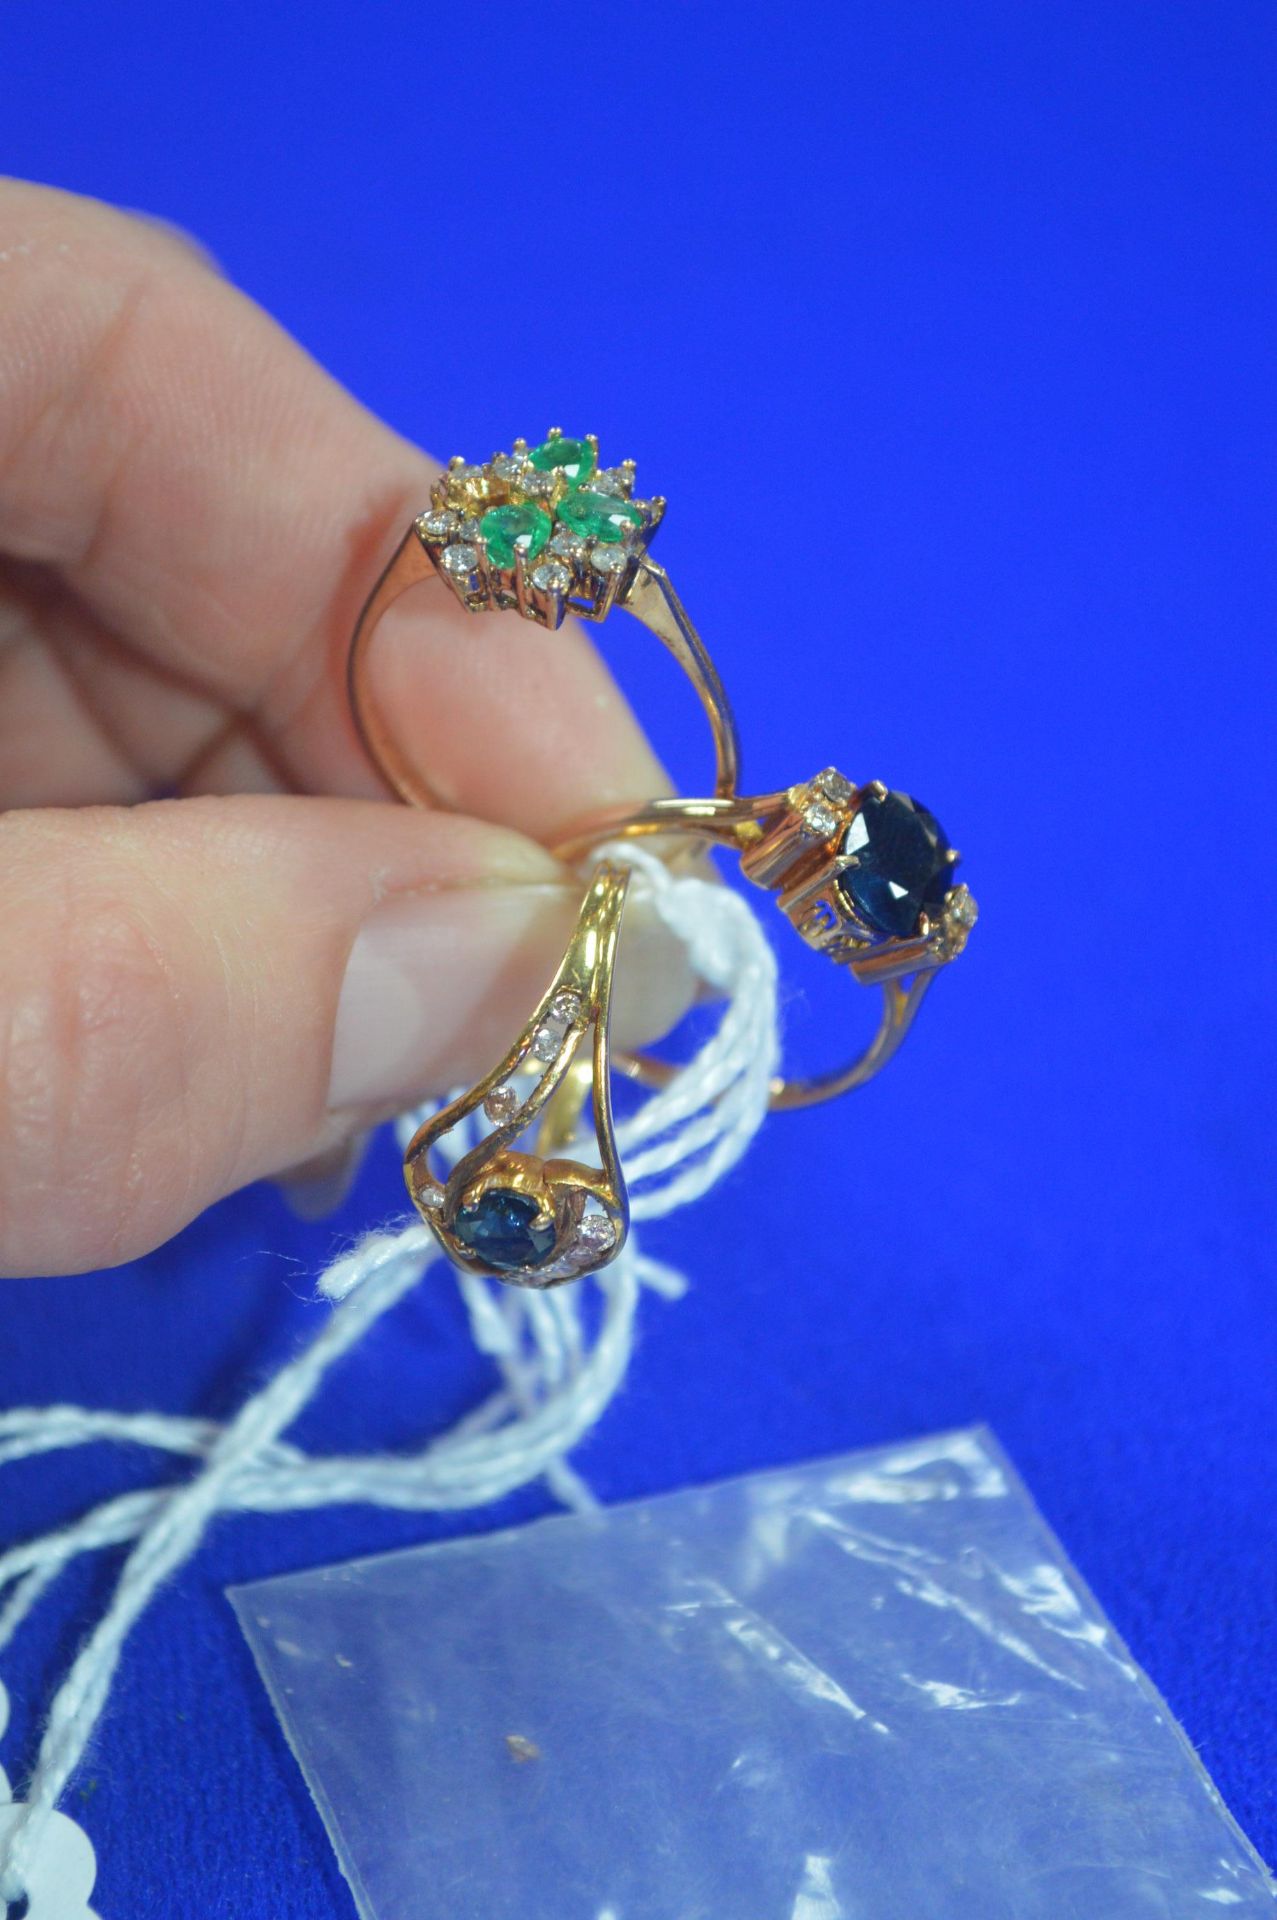 Two 18ct Gold Rings ~6g gross plus One Unmarked Ring (missing some stones) - Image 4 of 5